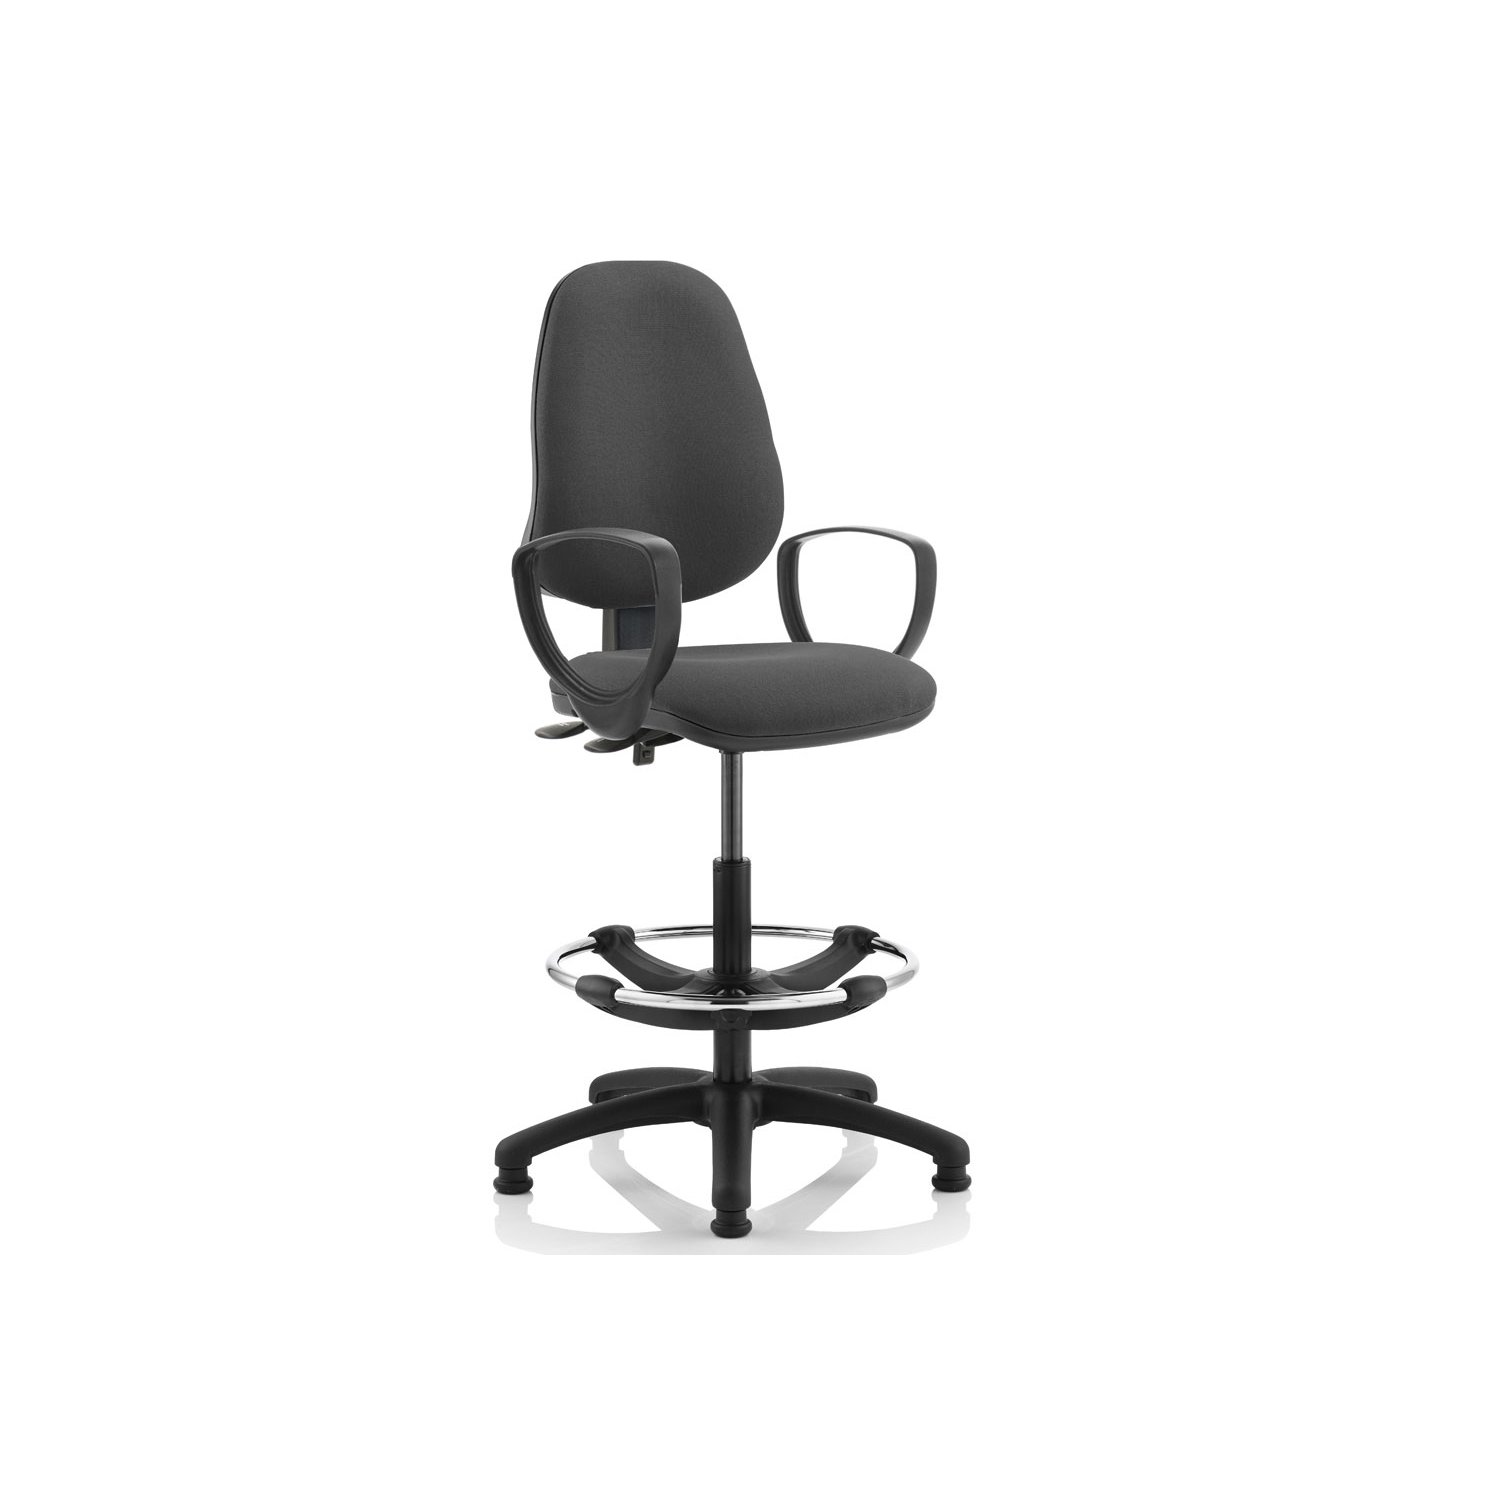 Lunar 2 Lever Draughtsman Chair (Fixed Arms), Charcoal